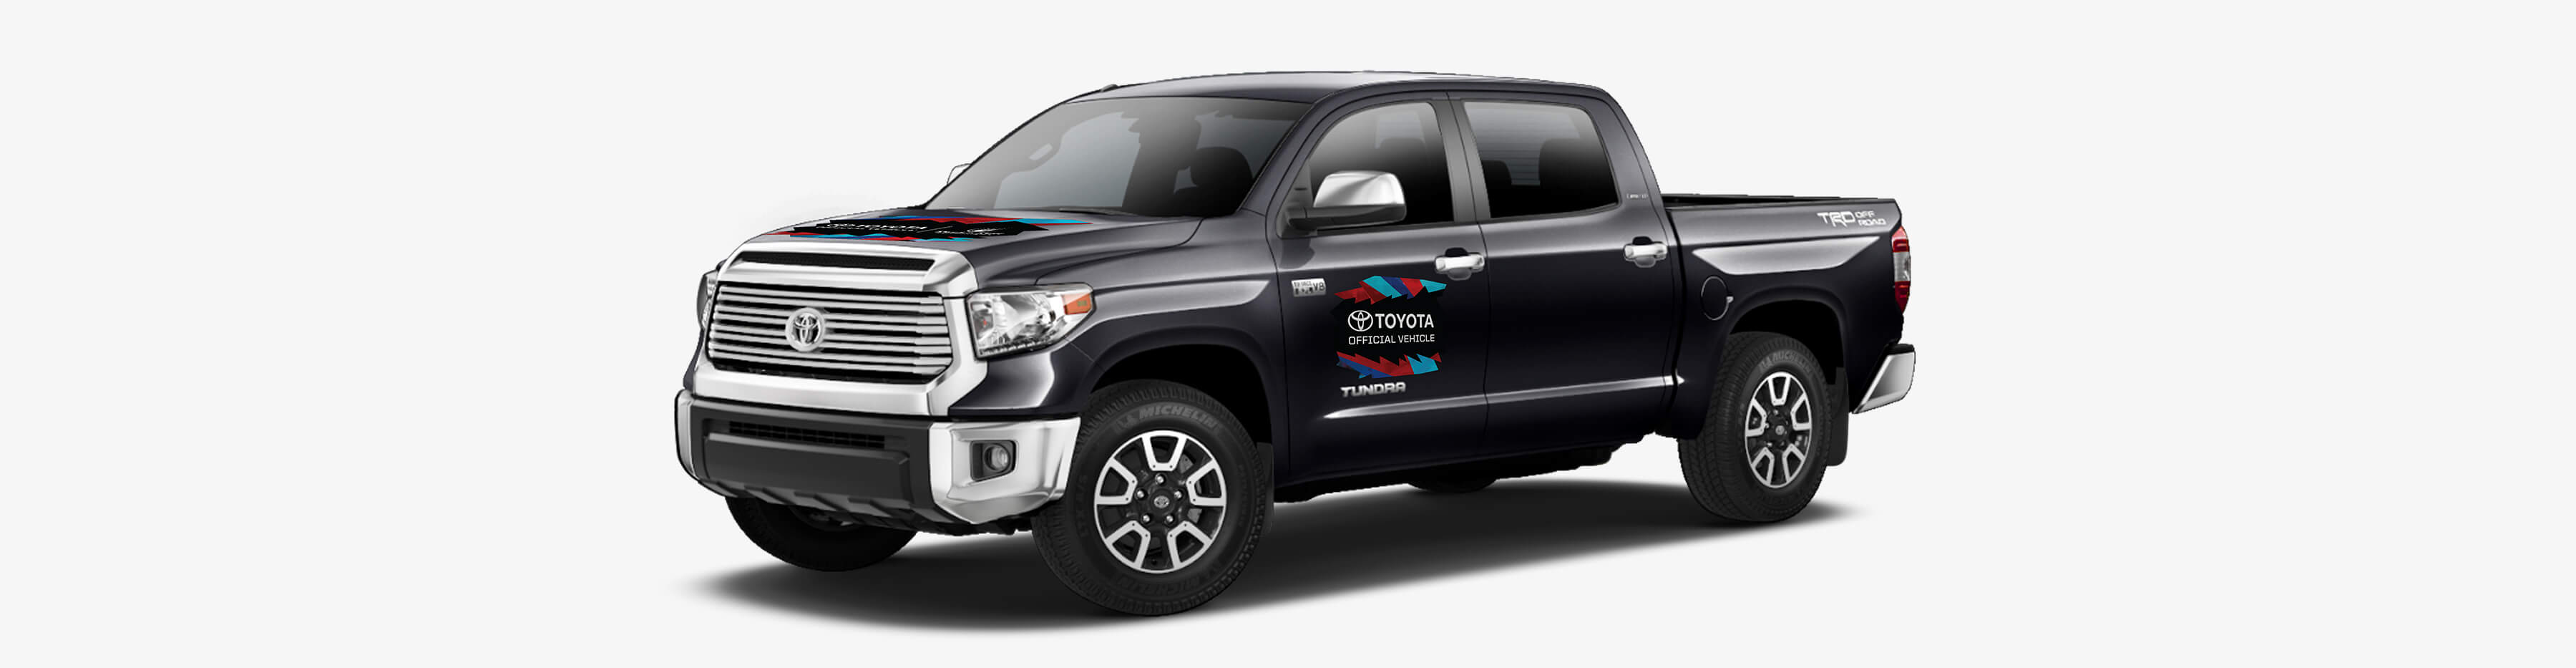 Toyota Rock Your Run. Photos of the Toyota Tundra static vehicle hood and door magnets.